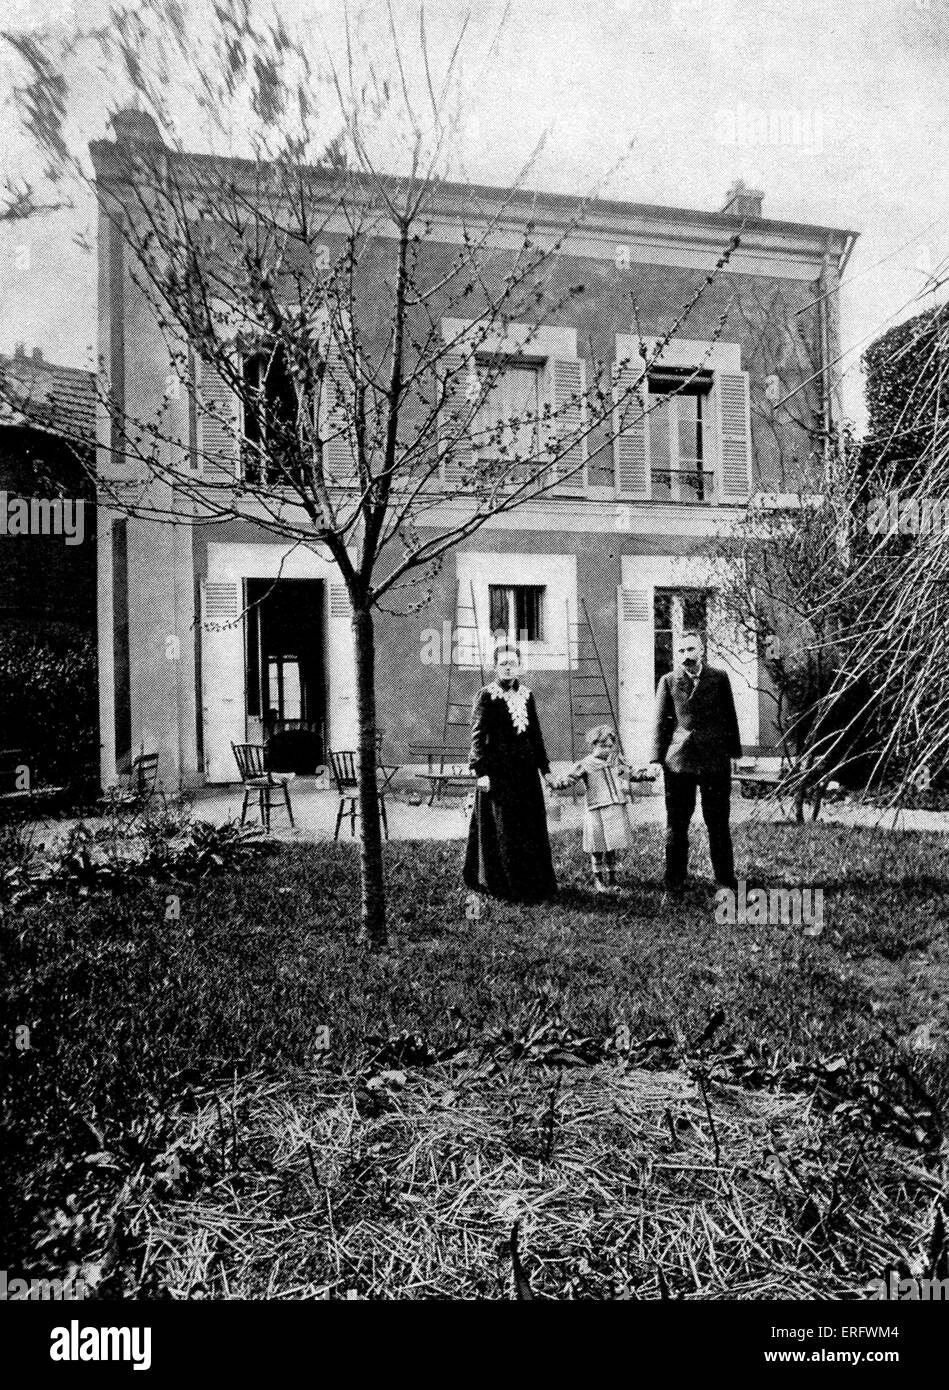 Pierre and Marie Curie with their duaghter Irene in the garden of the house on Boulevard Kellerman, 1908. MC: Polish-born French physicist and pioneer in radioactivity, 7 November 1867 – 4 July 1934. PC: French physicist and pioneer in radioactivity, 15 May 1859 – 19 April 1906. Stock Photo